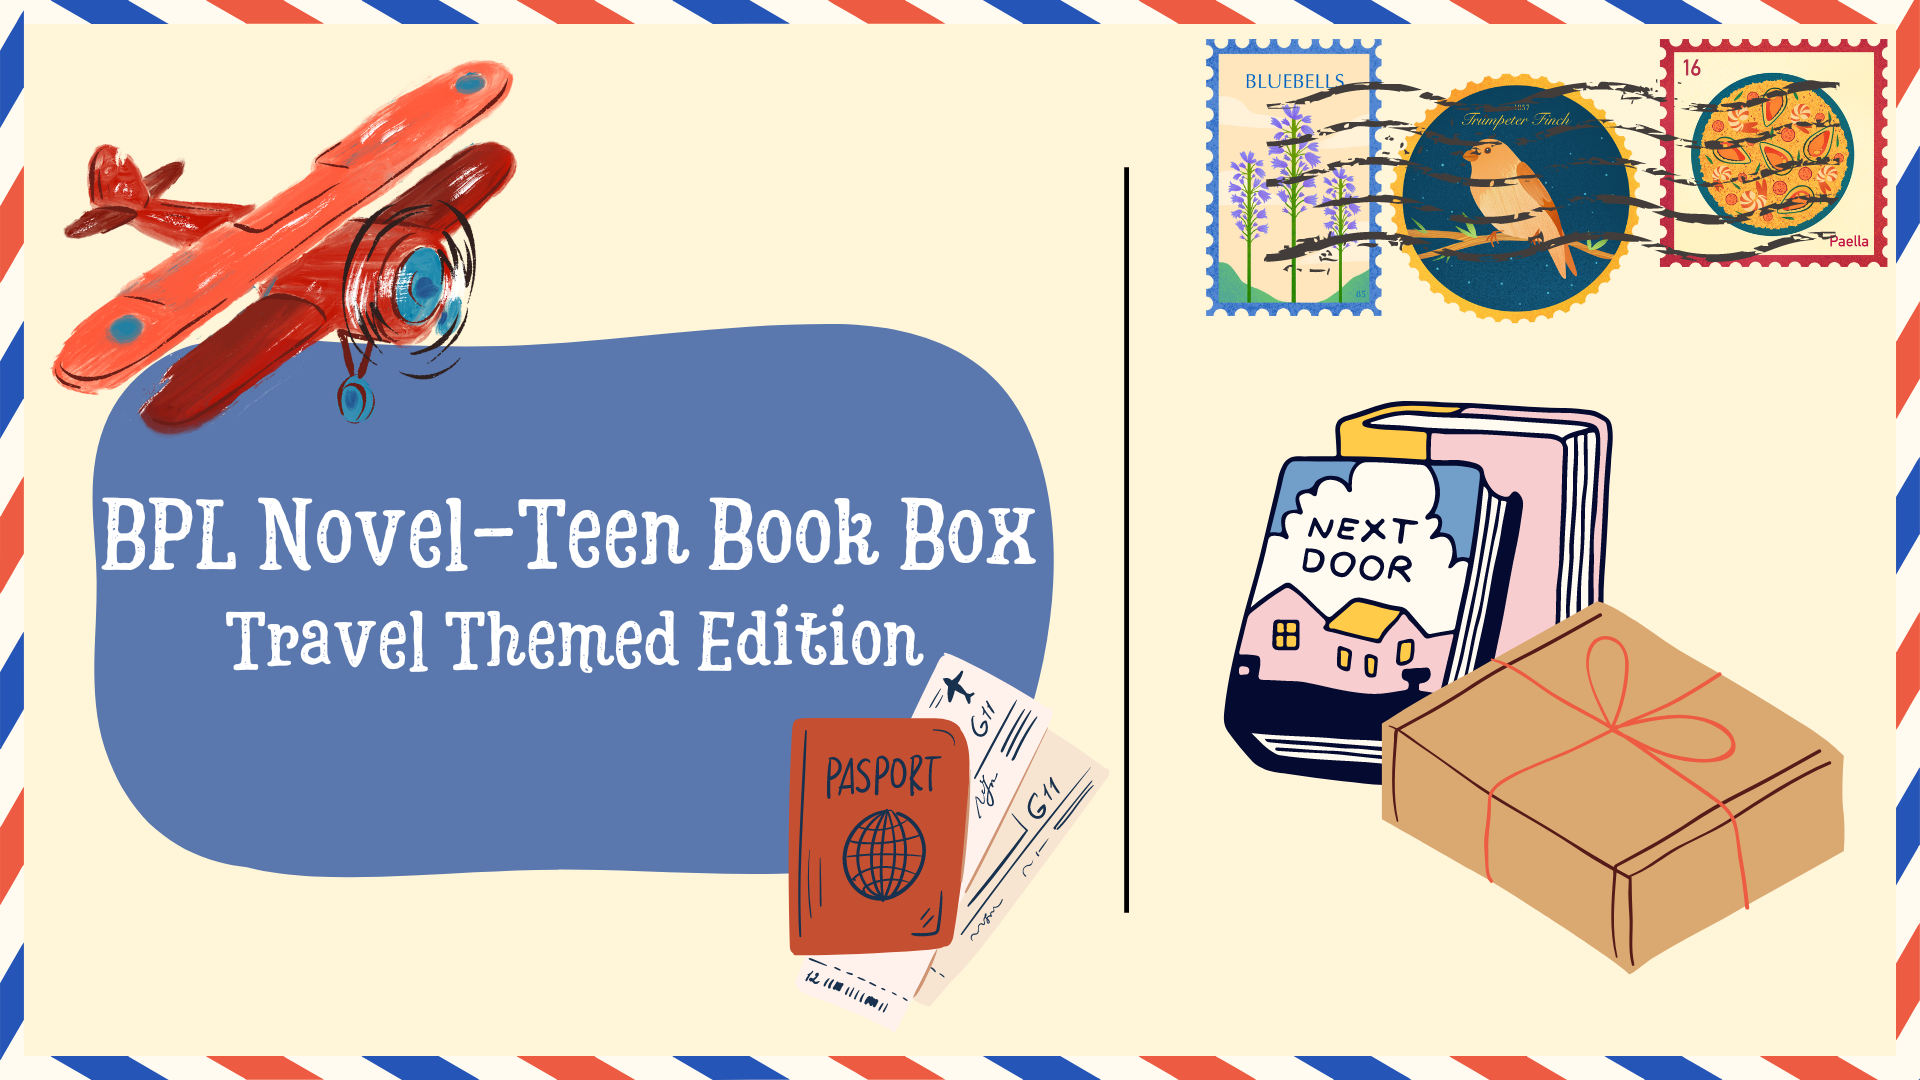 BPL Novel-Teen Book Box: Travel Themed Edition, illustration of an airplane, passport, package, and a book